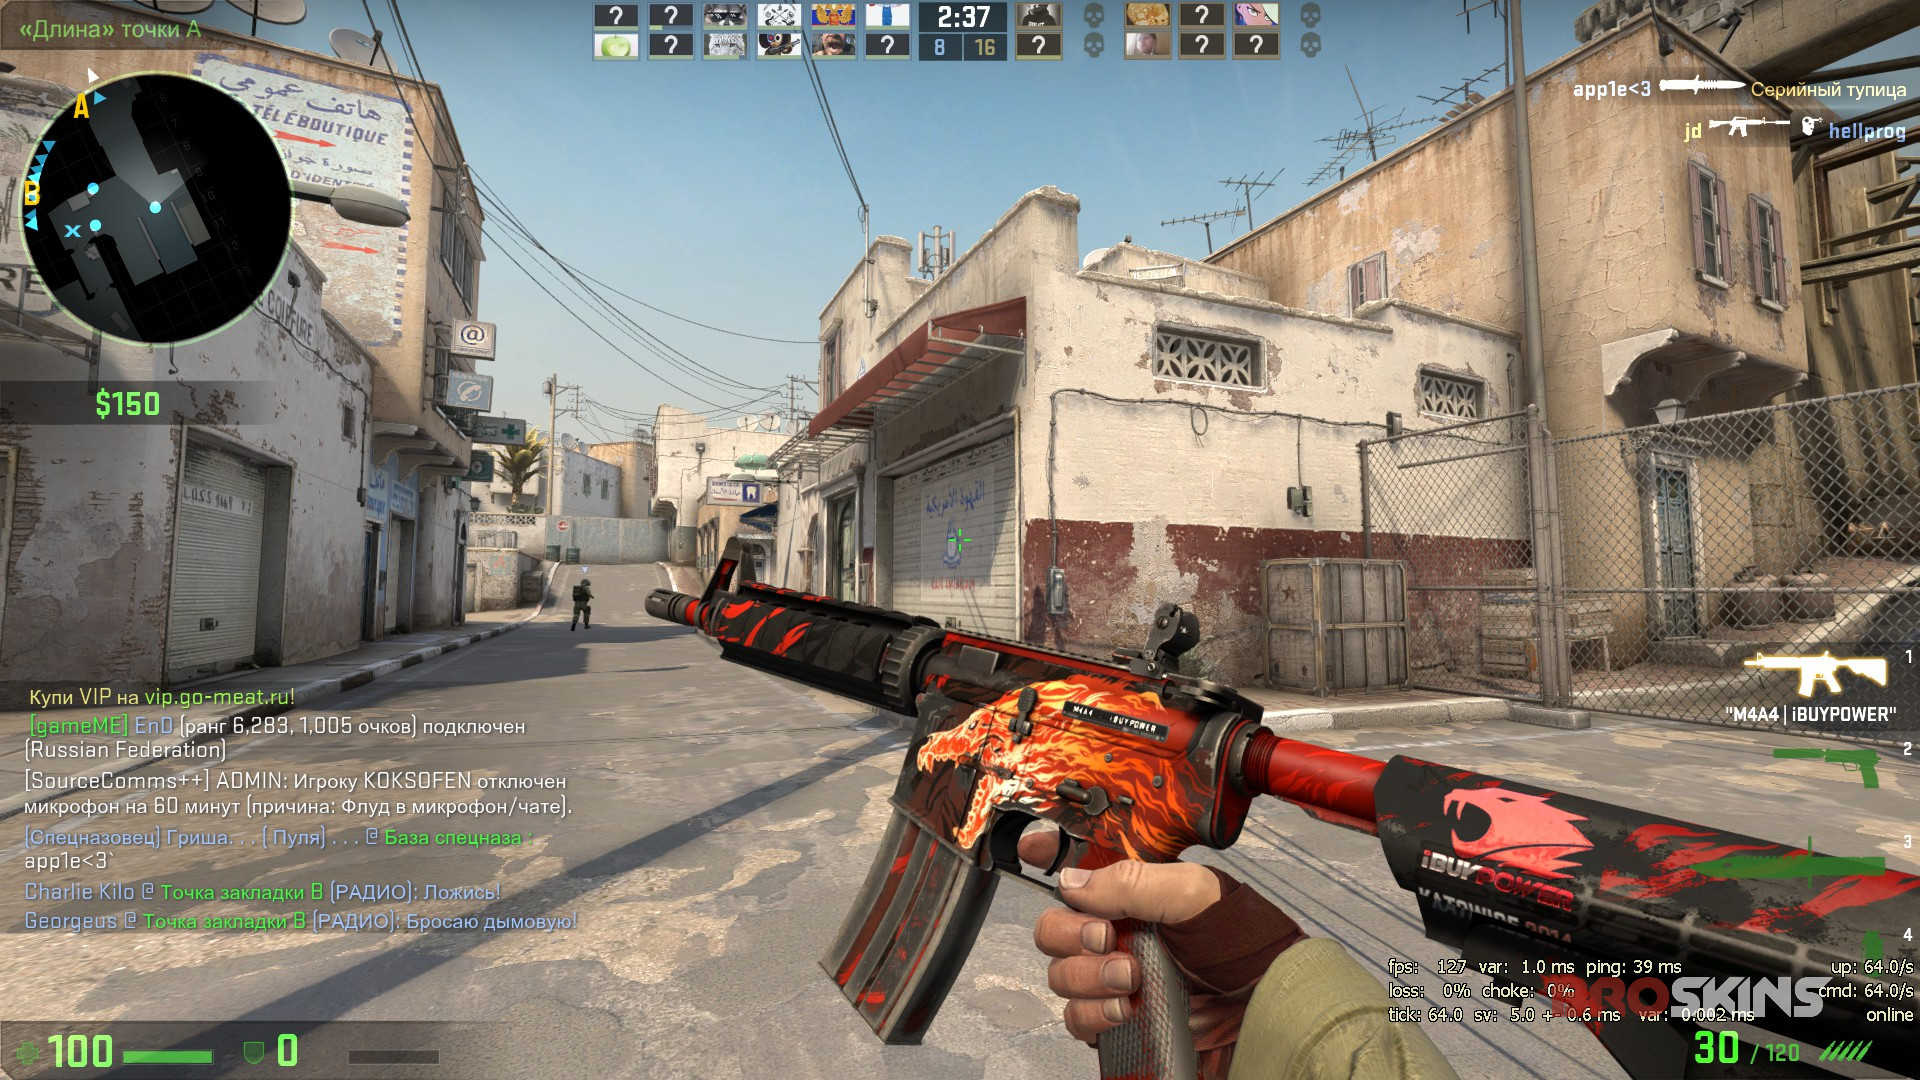 M4A4 Howl iBuypower Holo + Hand Wraps Slaughter